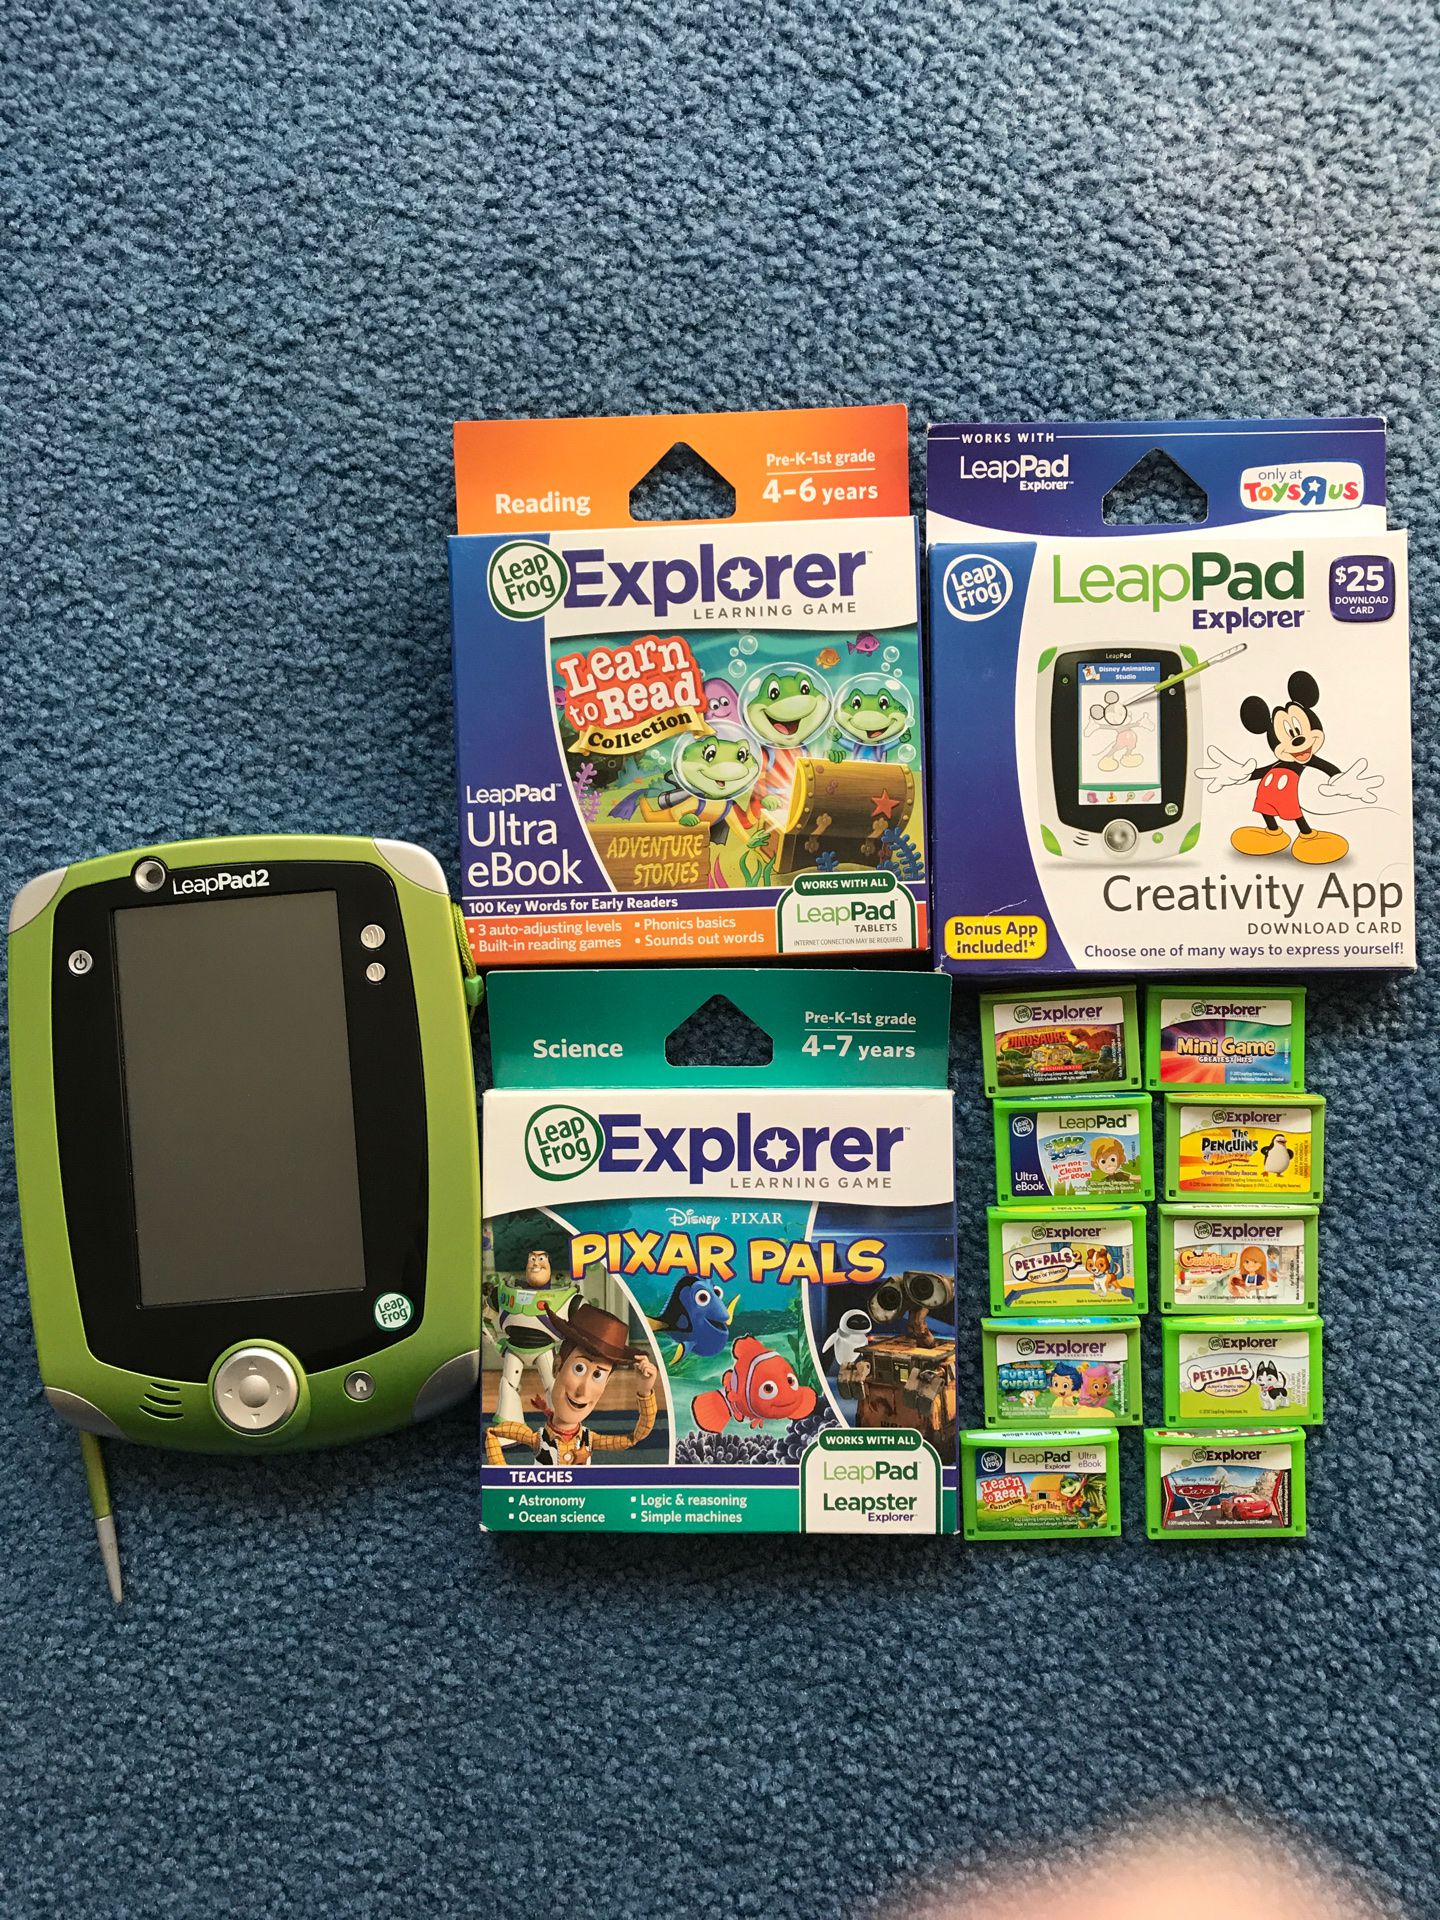 LeapPad 2 learning games